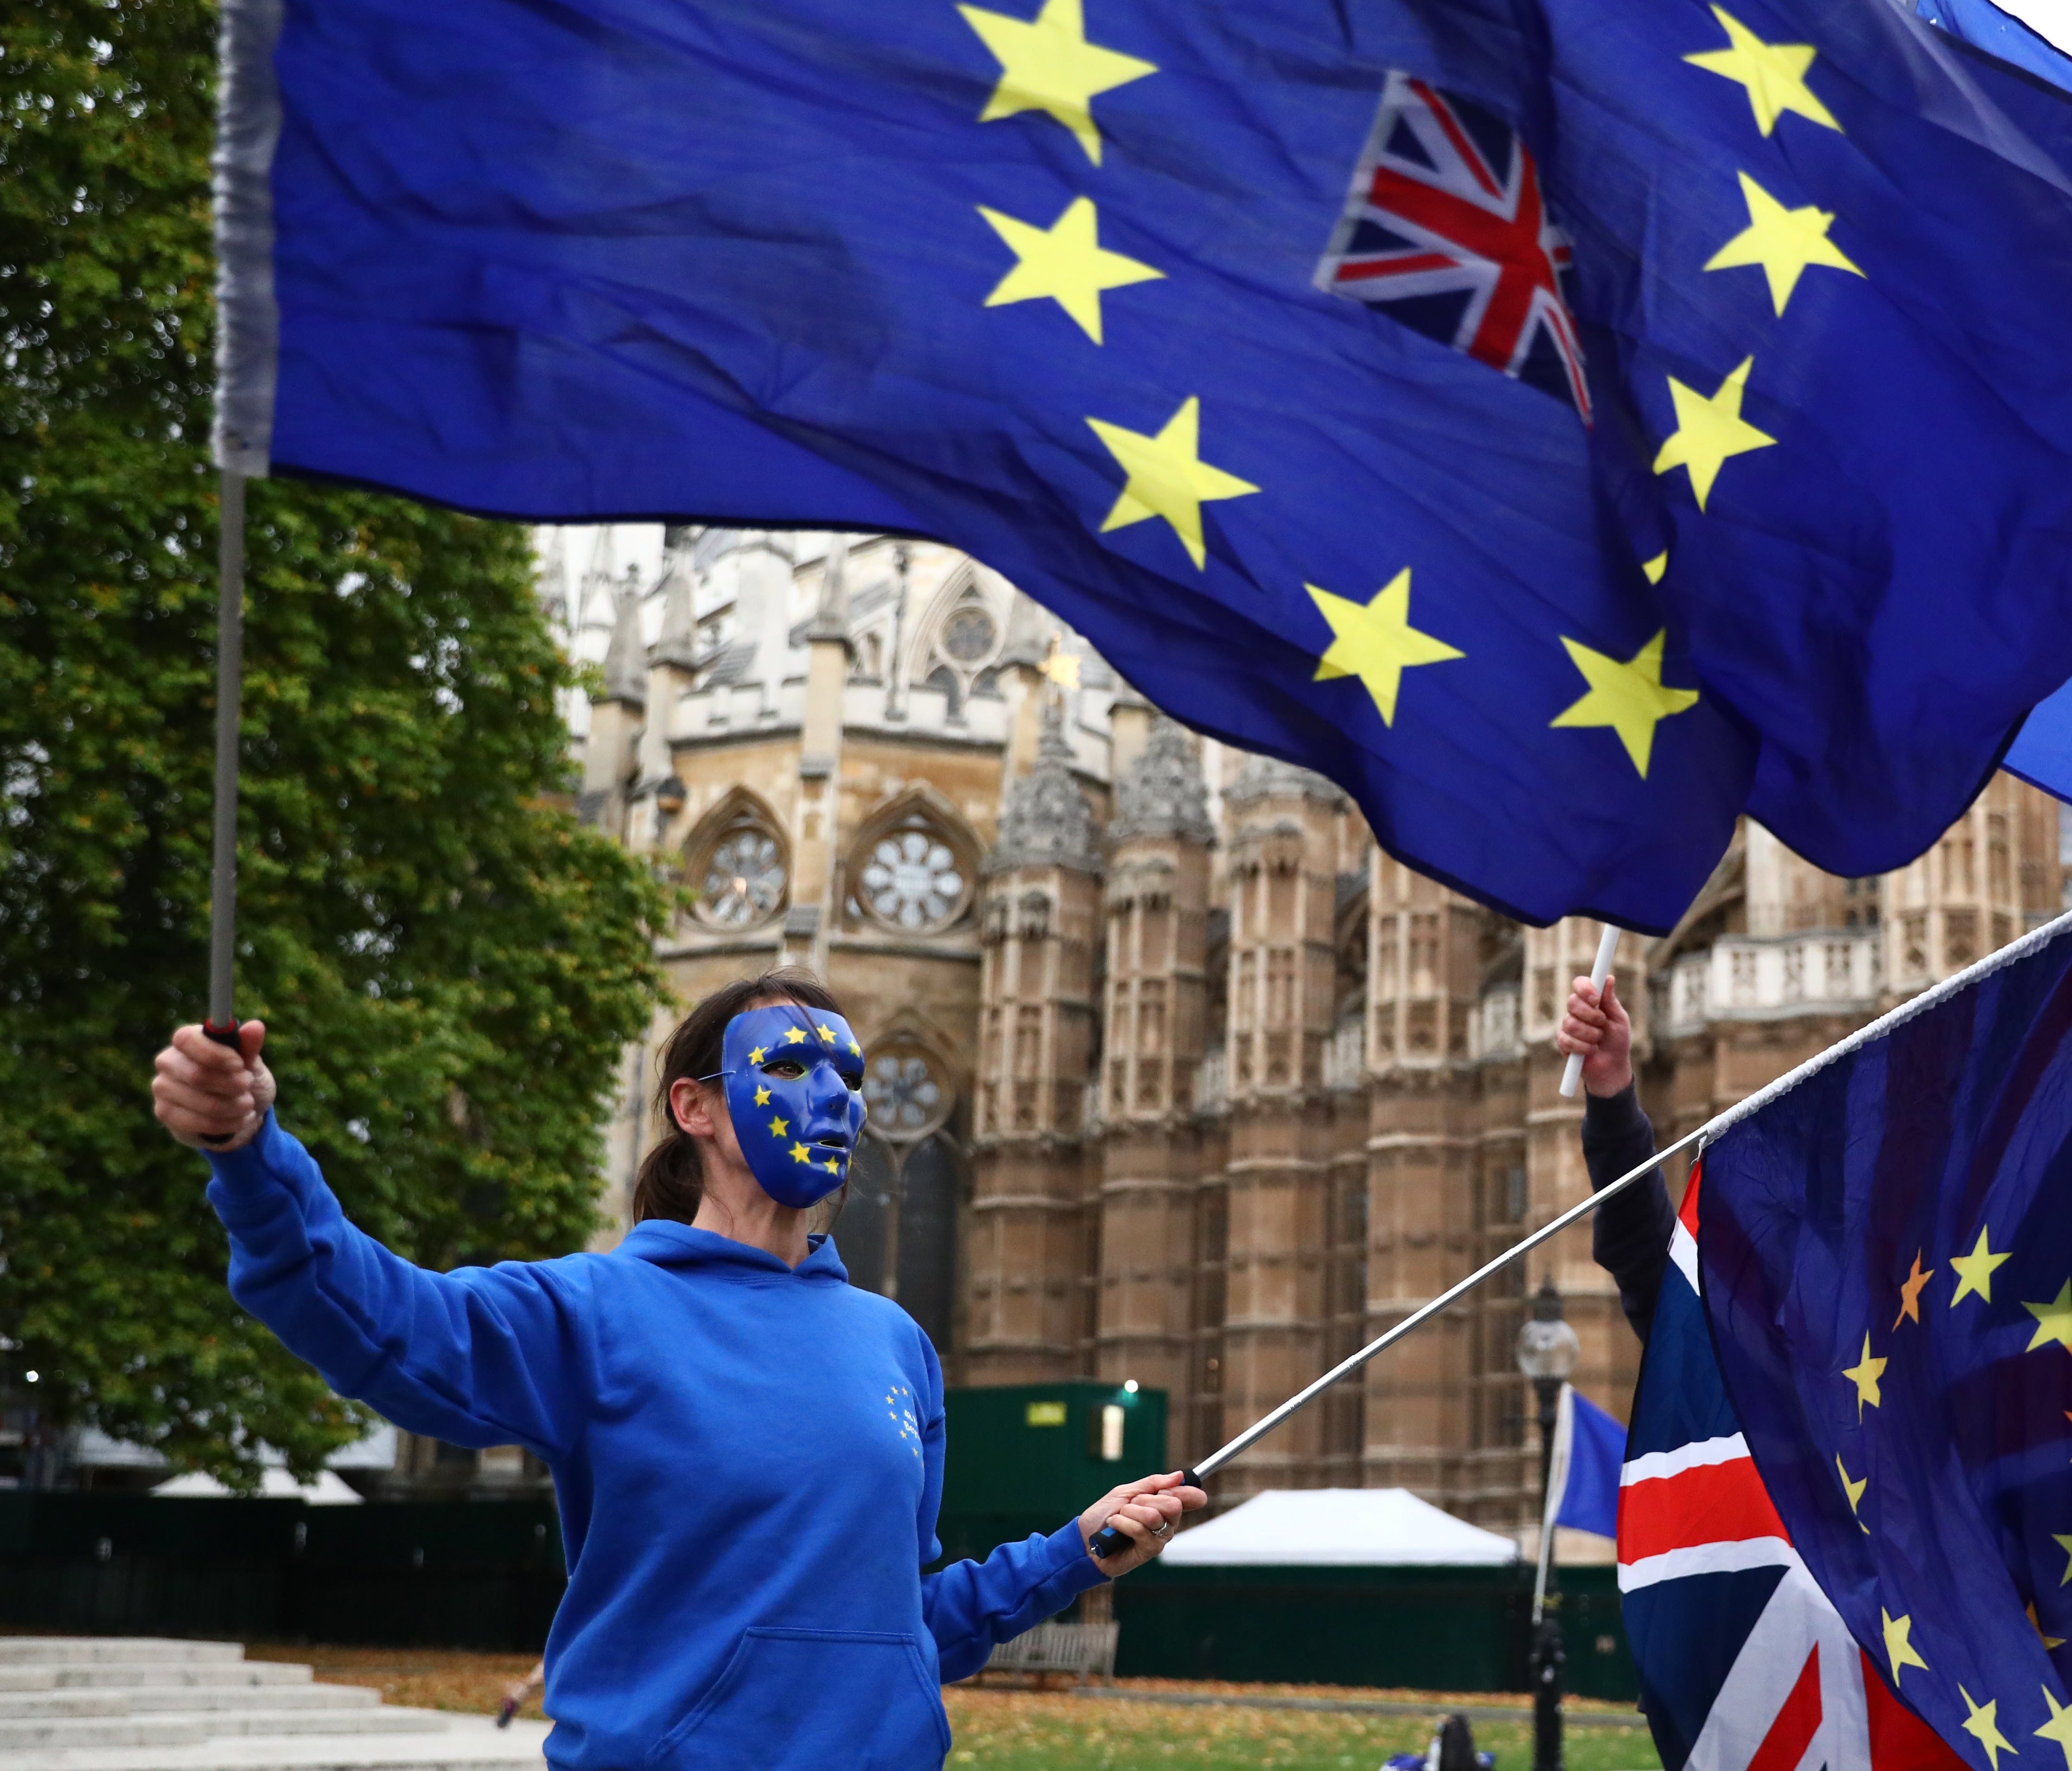 Pro-EU campaigners protest outside the Houses of Parliament in London on Oct. 17, 2017.